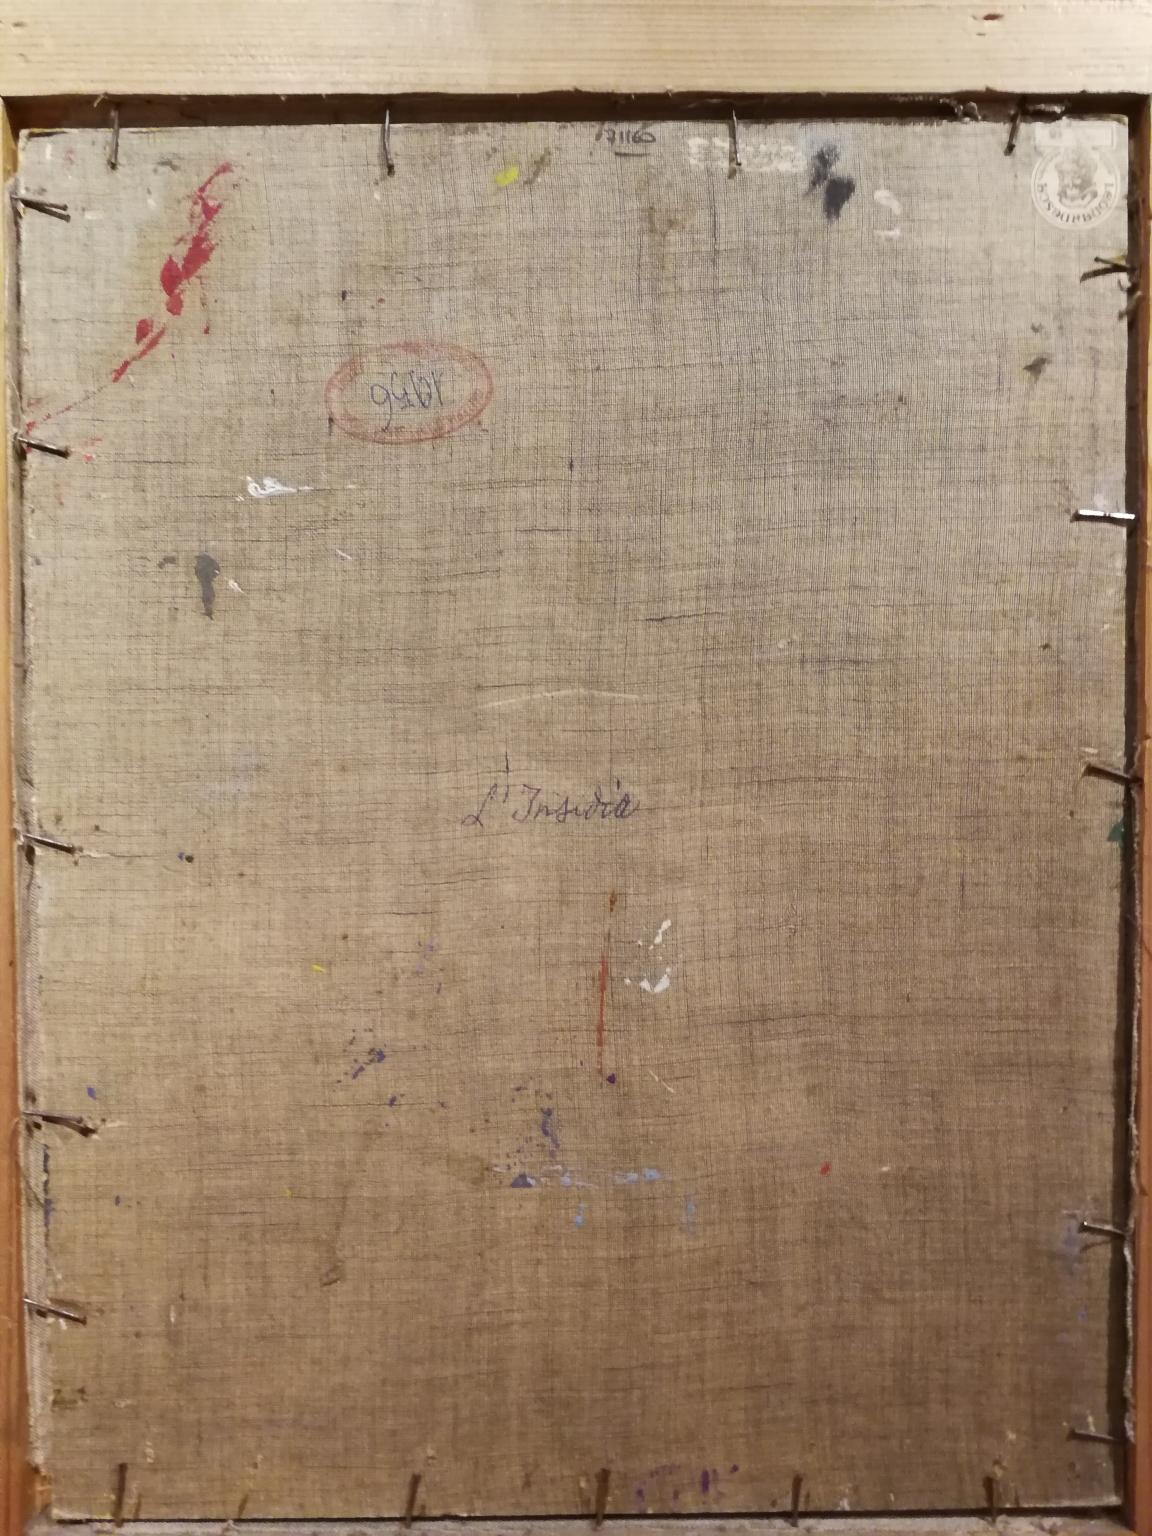 The painting (oil on canvas, 44.5 x 35 cm; with wood frame 64 x 54,5 cm) represents a moment on deception.
It's signed Maccari on the bottom left, and it's dated 1956 and titled 